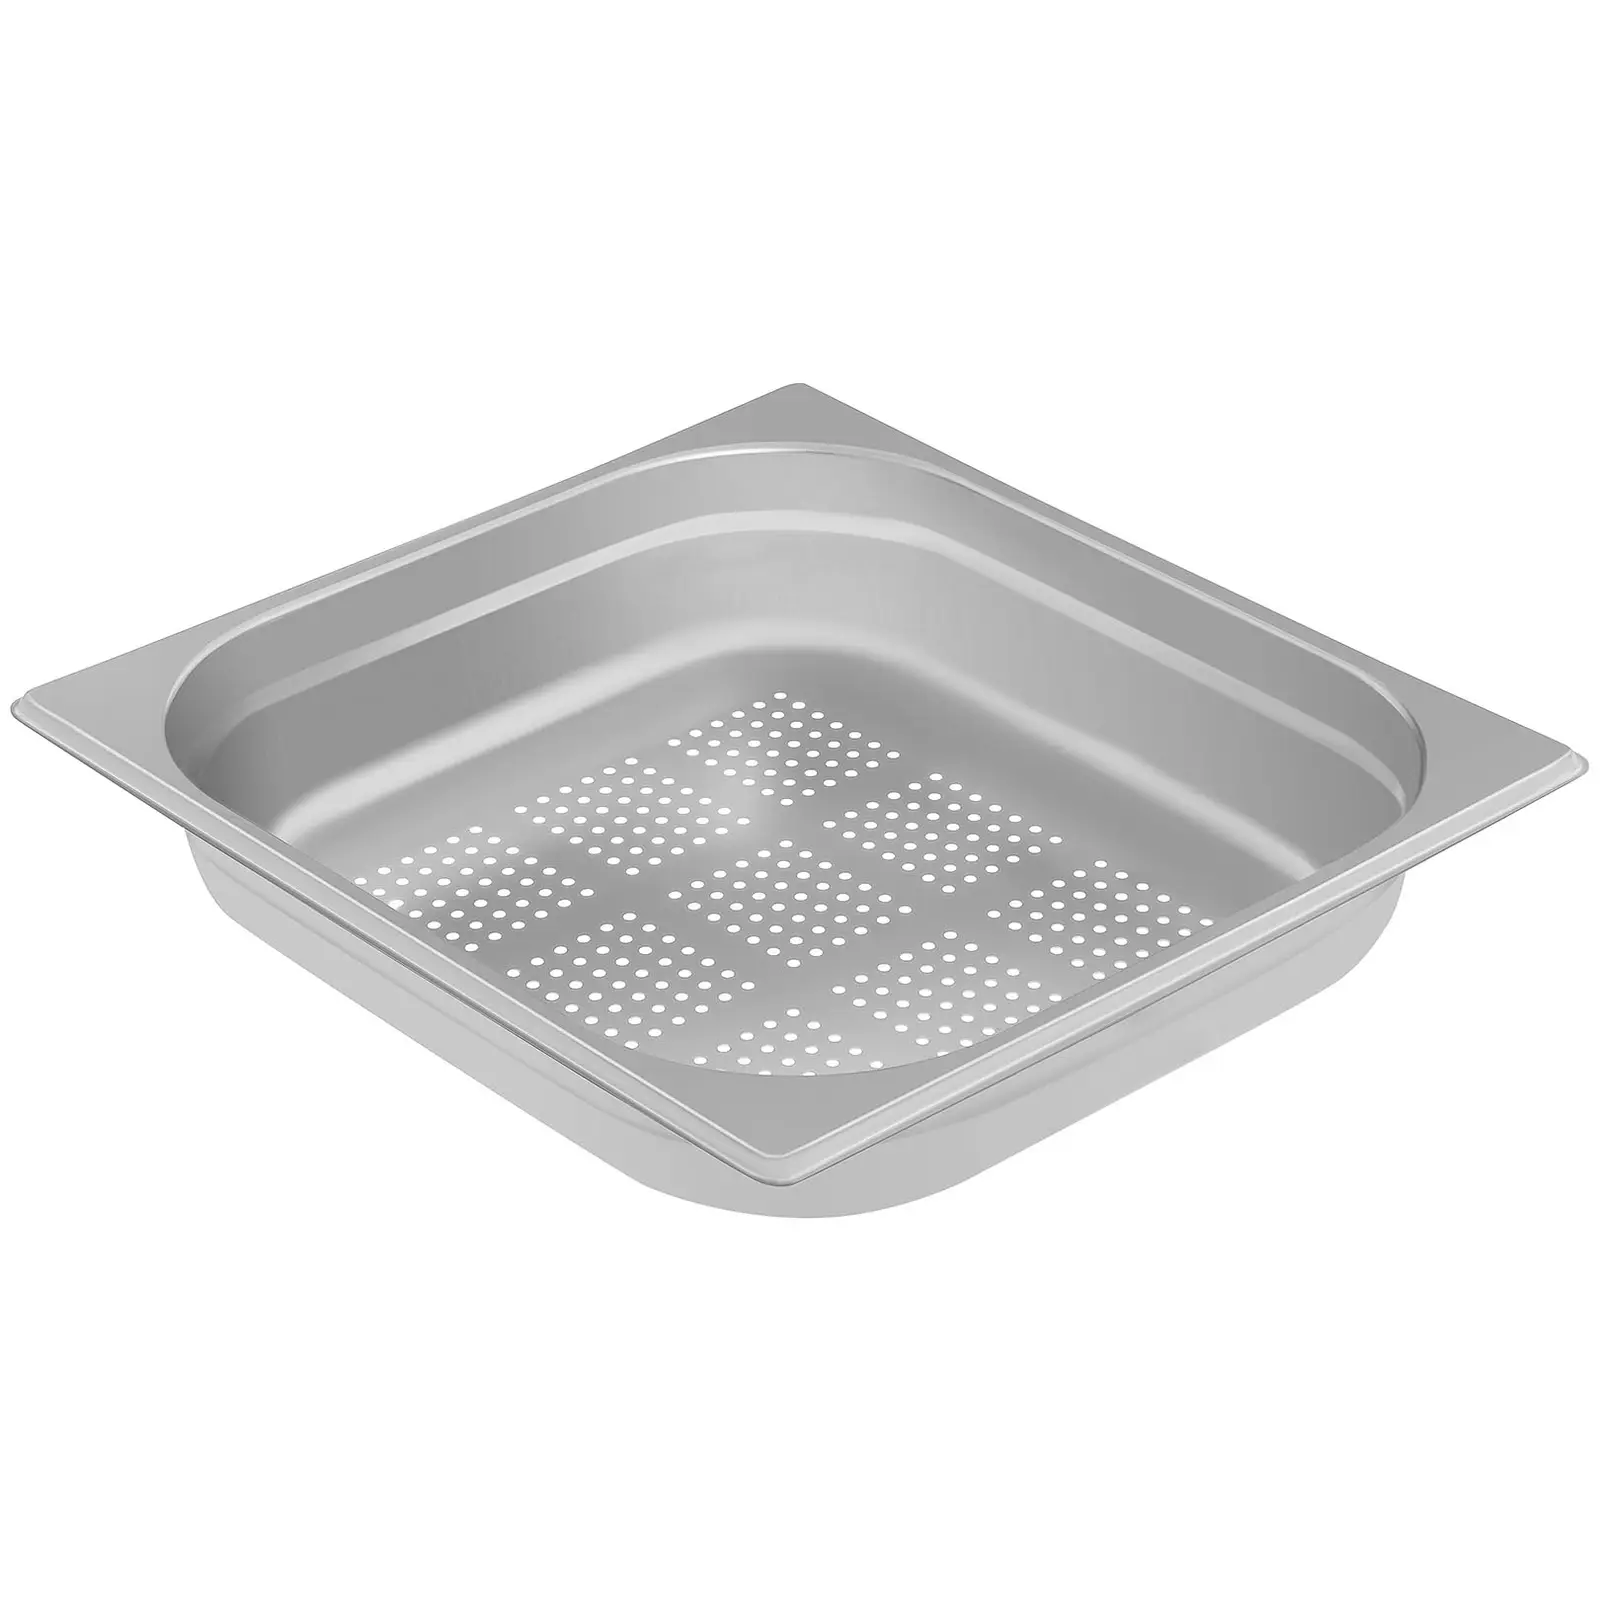 Gastronorm Tray - 2/3 - 65 mm - Perforated